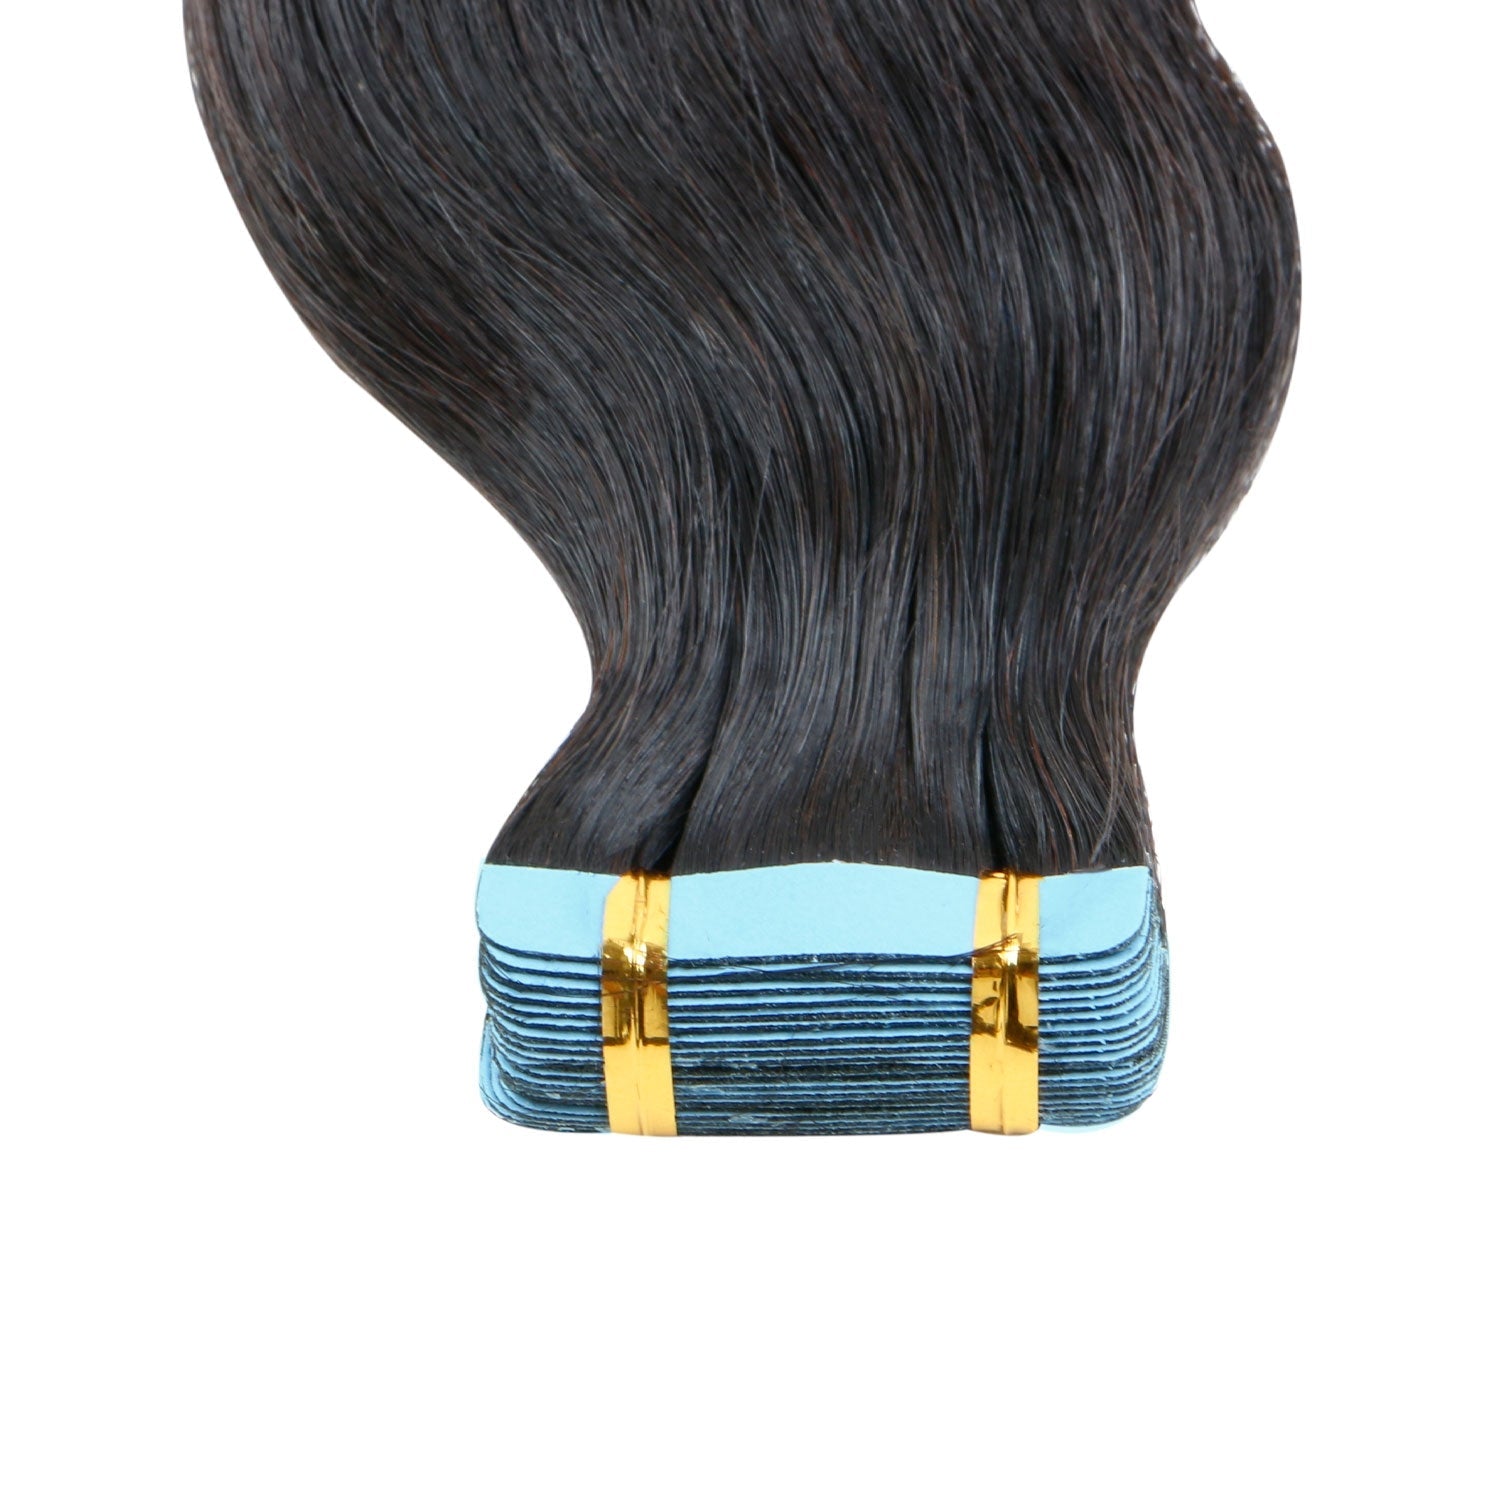 100% human hair tape-in extensions 50g/20 pcs